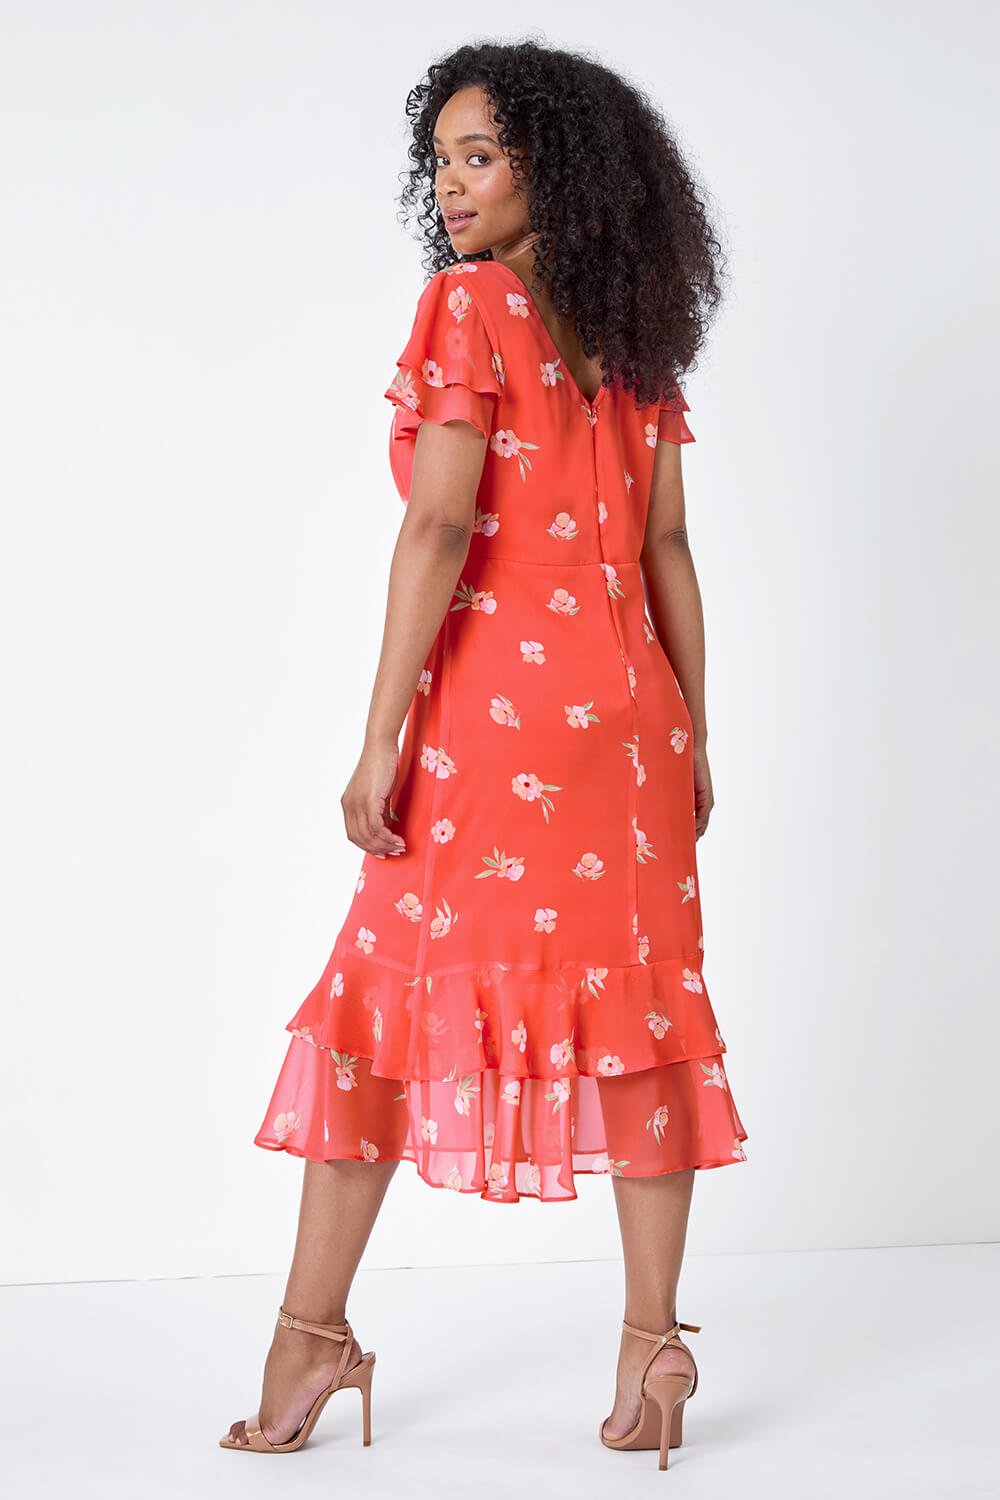 CORAL Petite Floral Chiffon Frill Tiered Midi Dress, Image 3 of 5